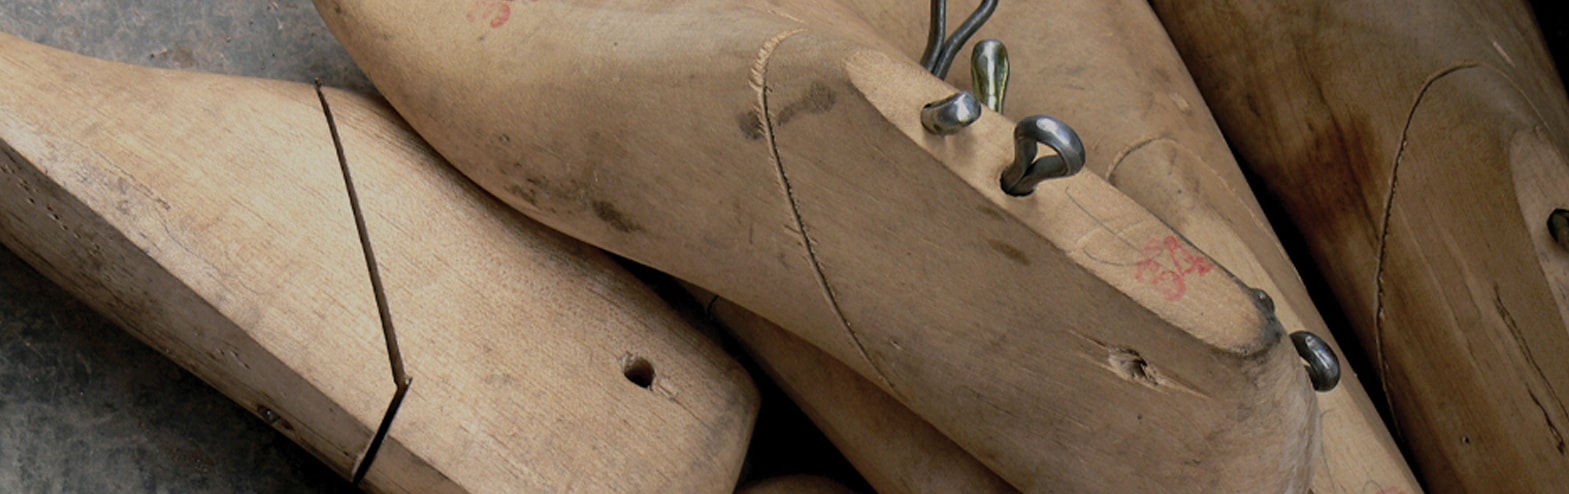 Sustainability: The featured image includes wooden shoe trees.